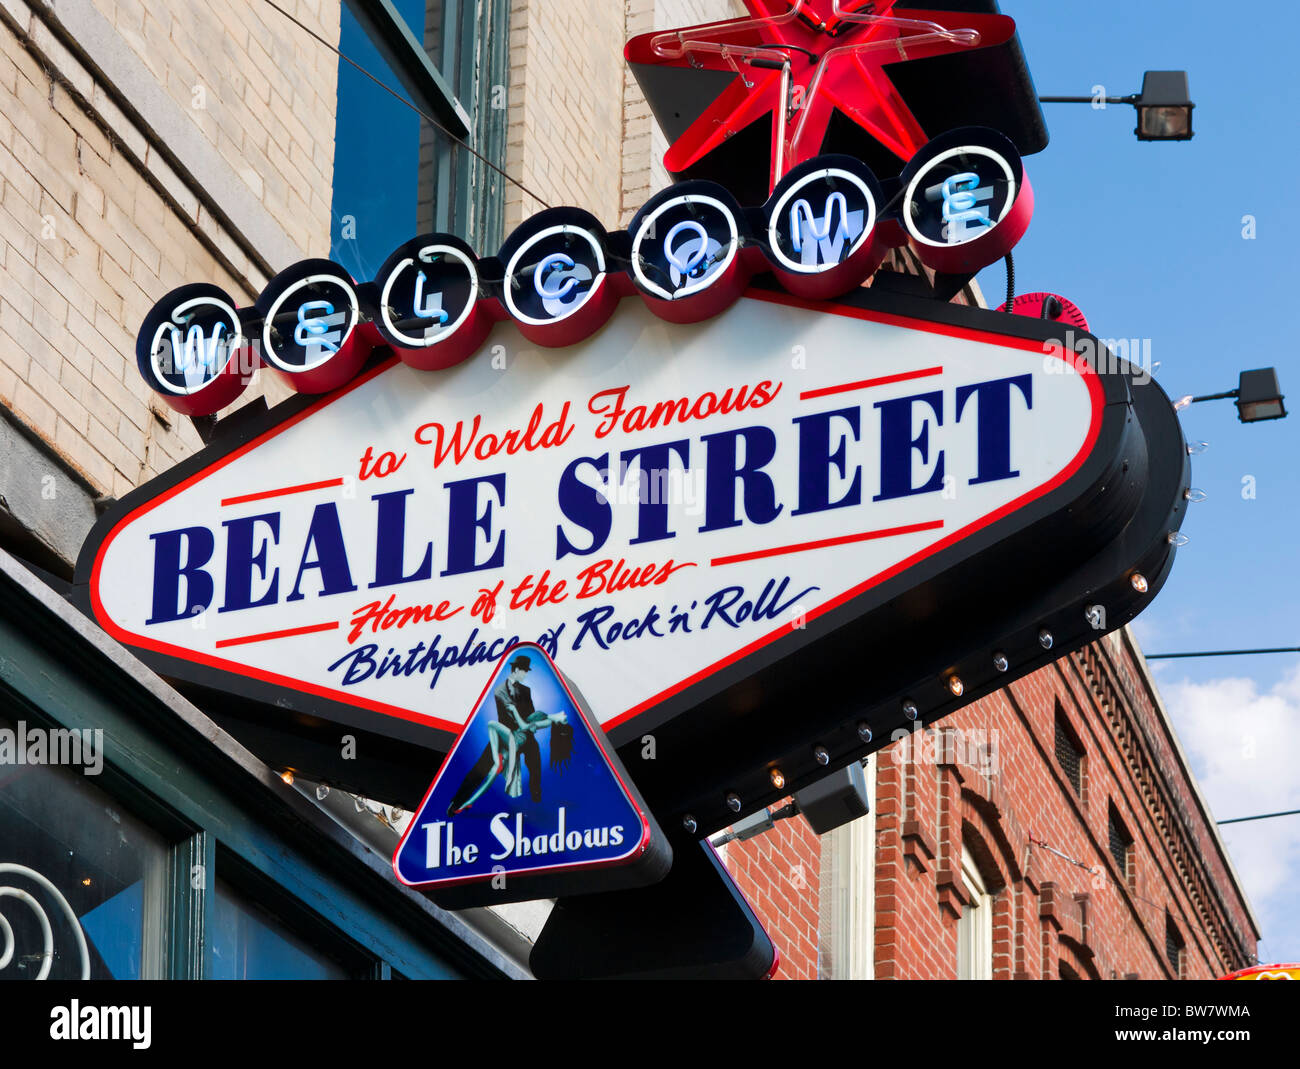 Welcome sign on Beale Street, Memphis, Tennessee, USA Stock Photo